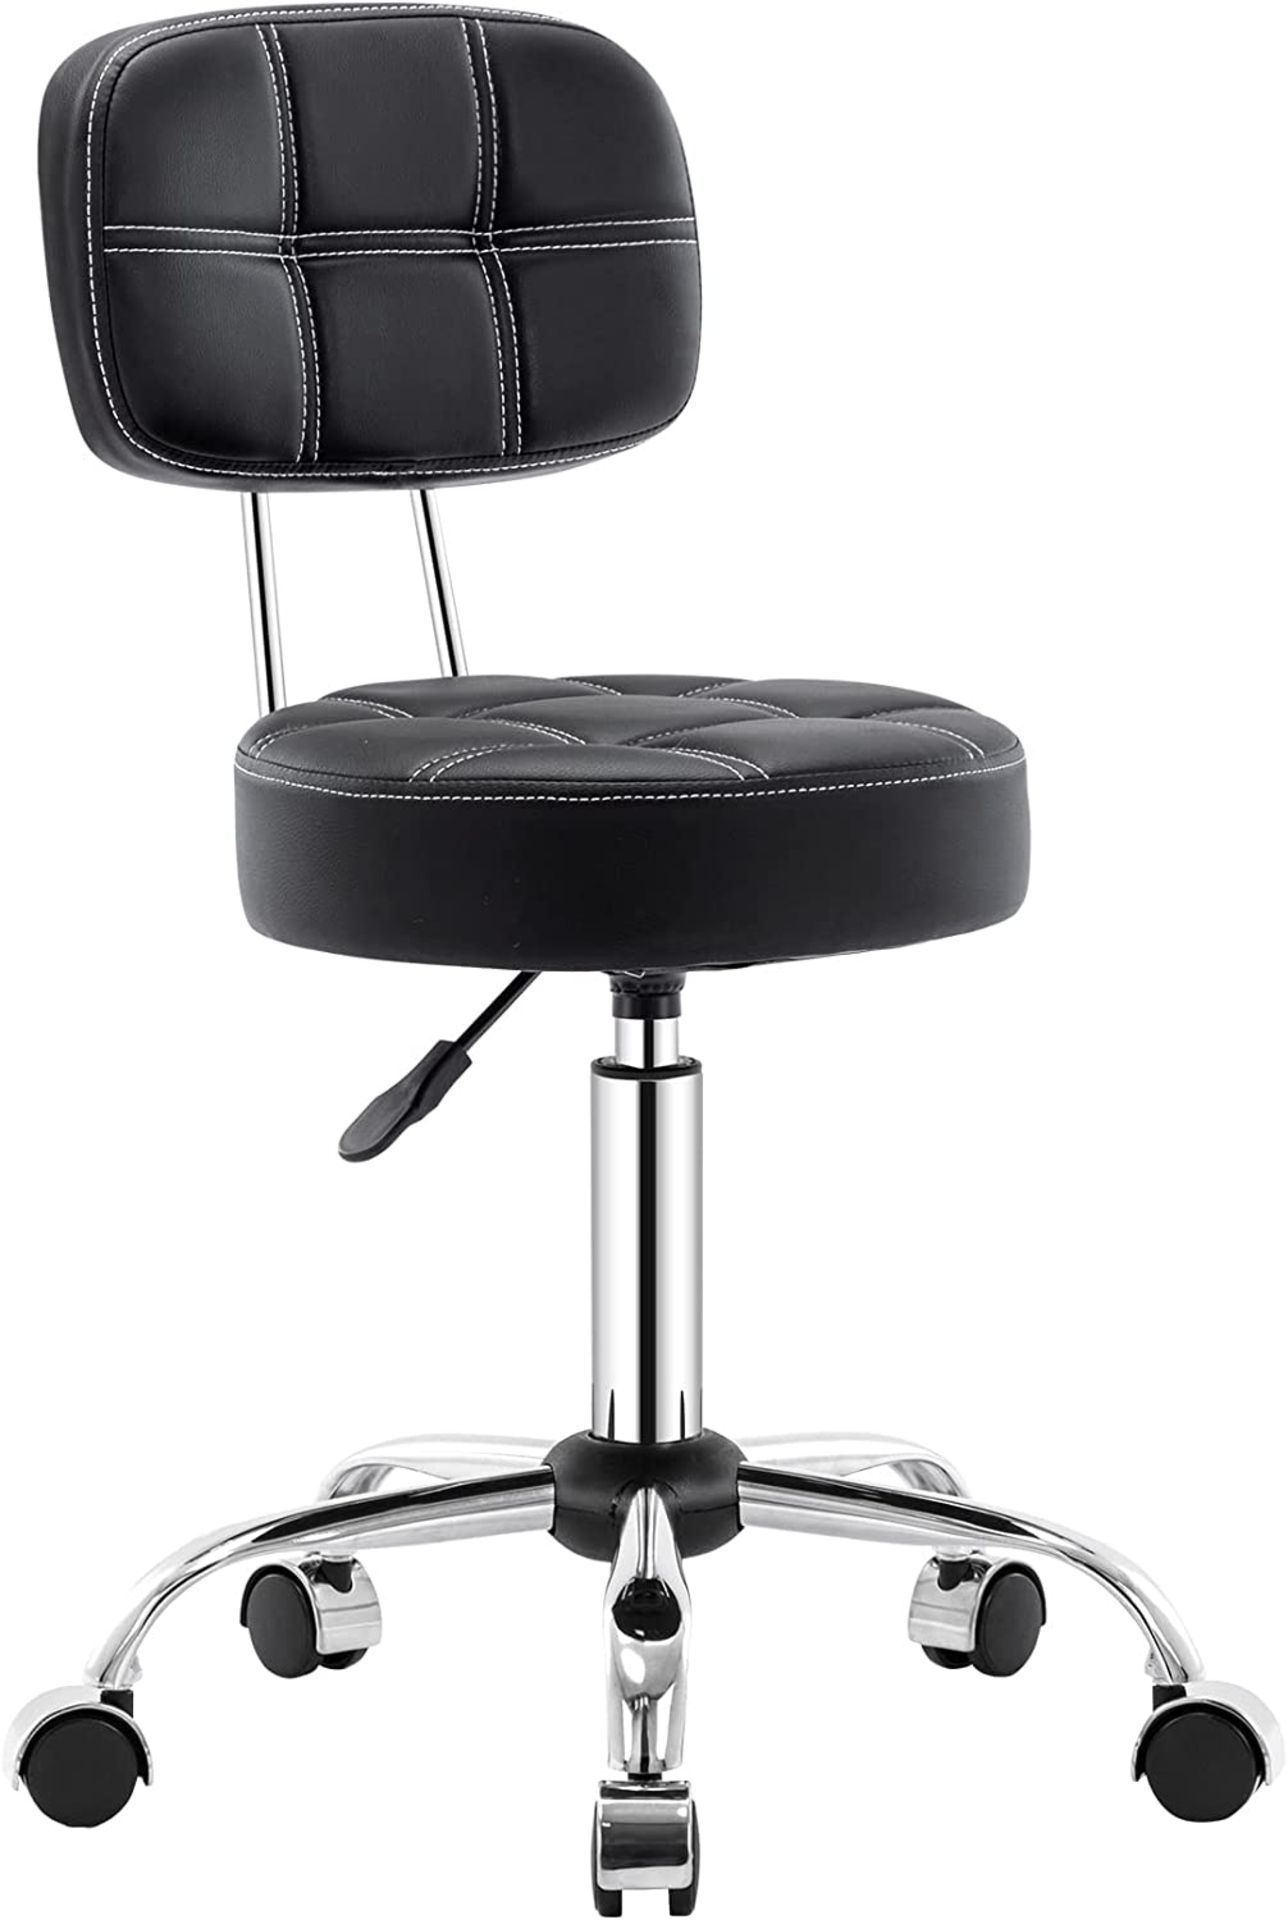 NEW Rolling stool with High Backrest, Leather Massage Stool Ergonomic Drafting Chair for Home Swivel